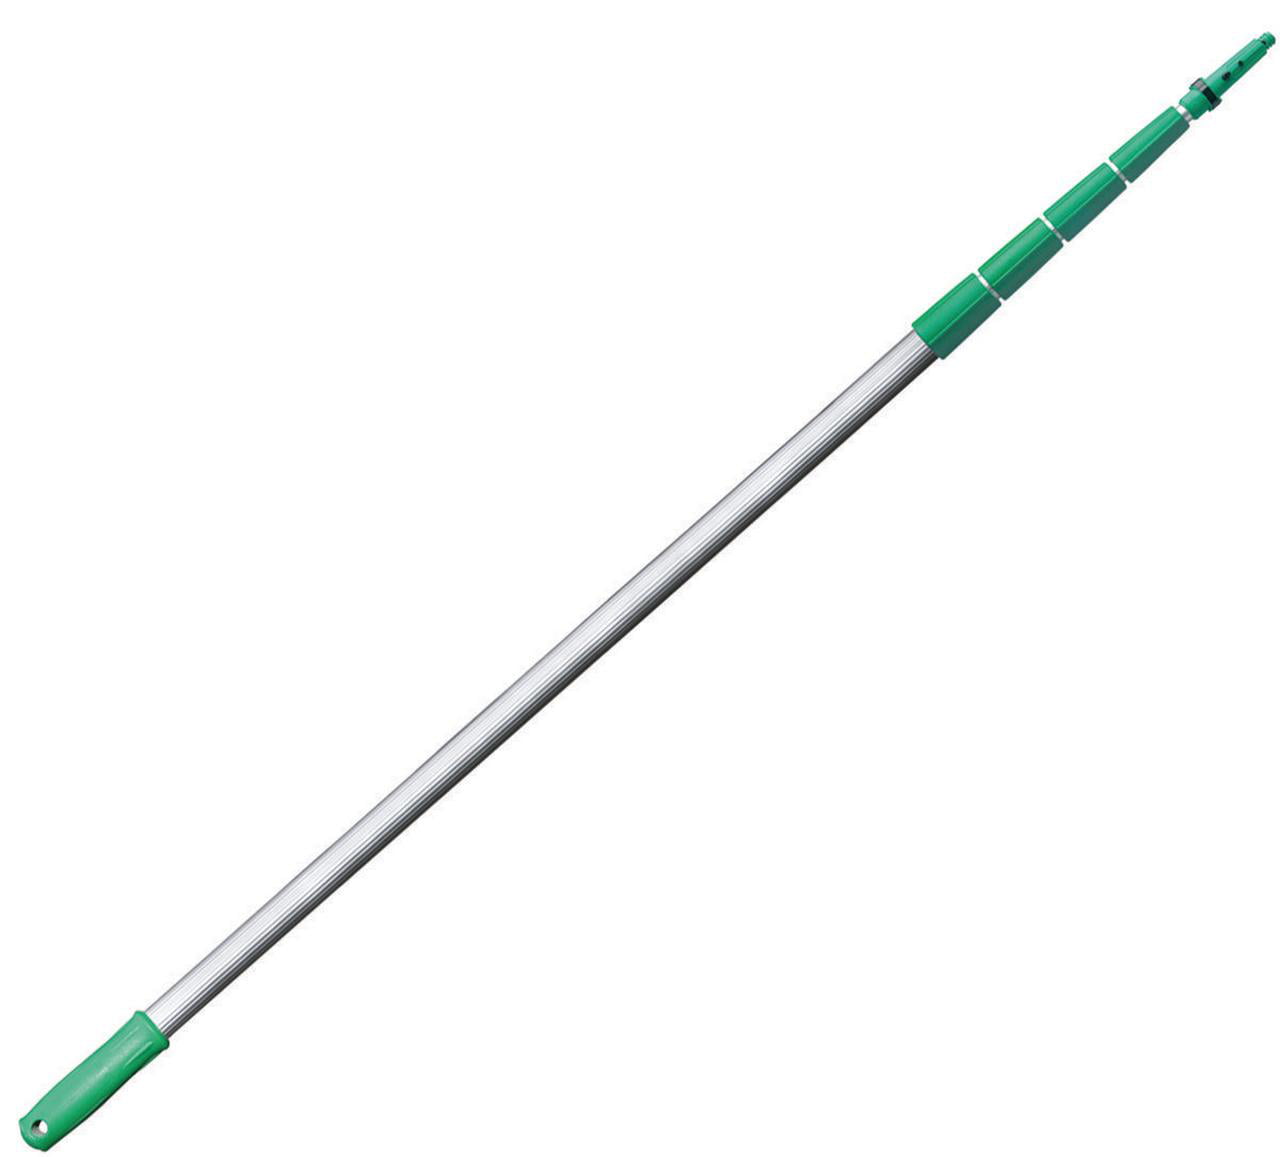 Unger TF900 Telescopic Extension Pole, For Use With Squeegee, 30 ft L Unger 30 Foot Telescoping Pole